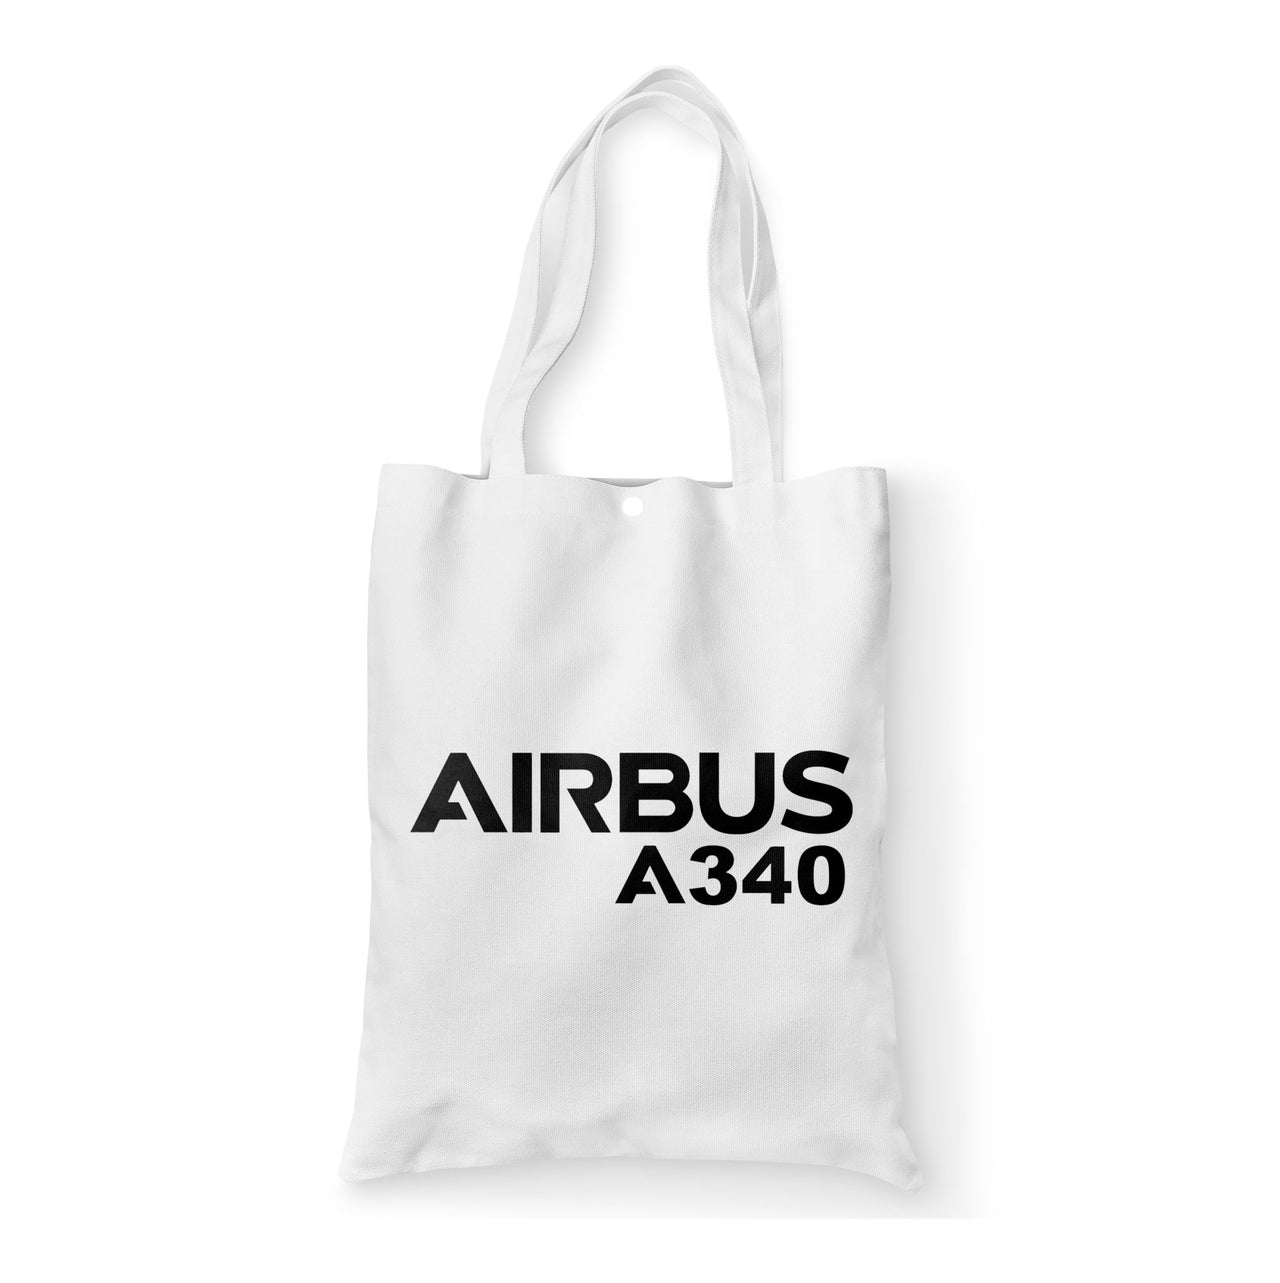 Airbus A340 & Text Designed Tote Bags